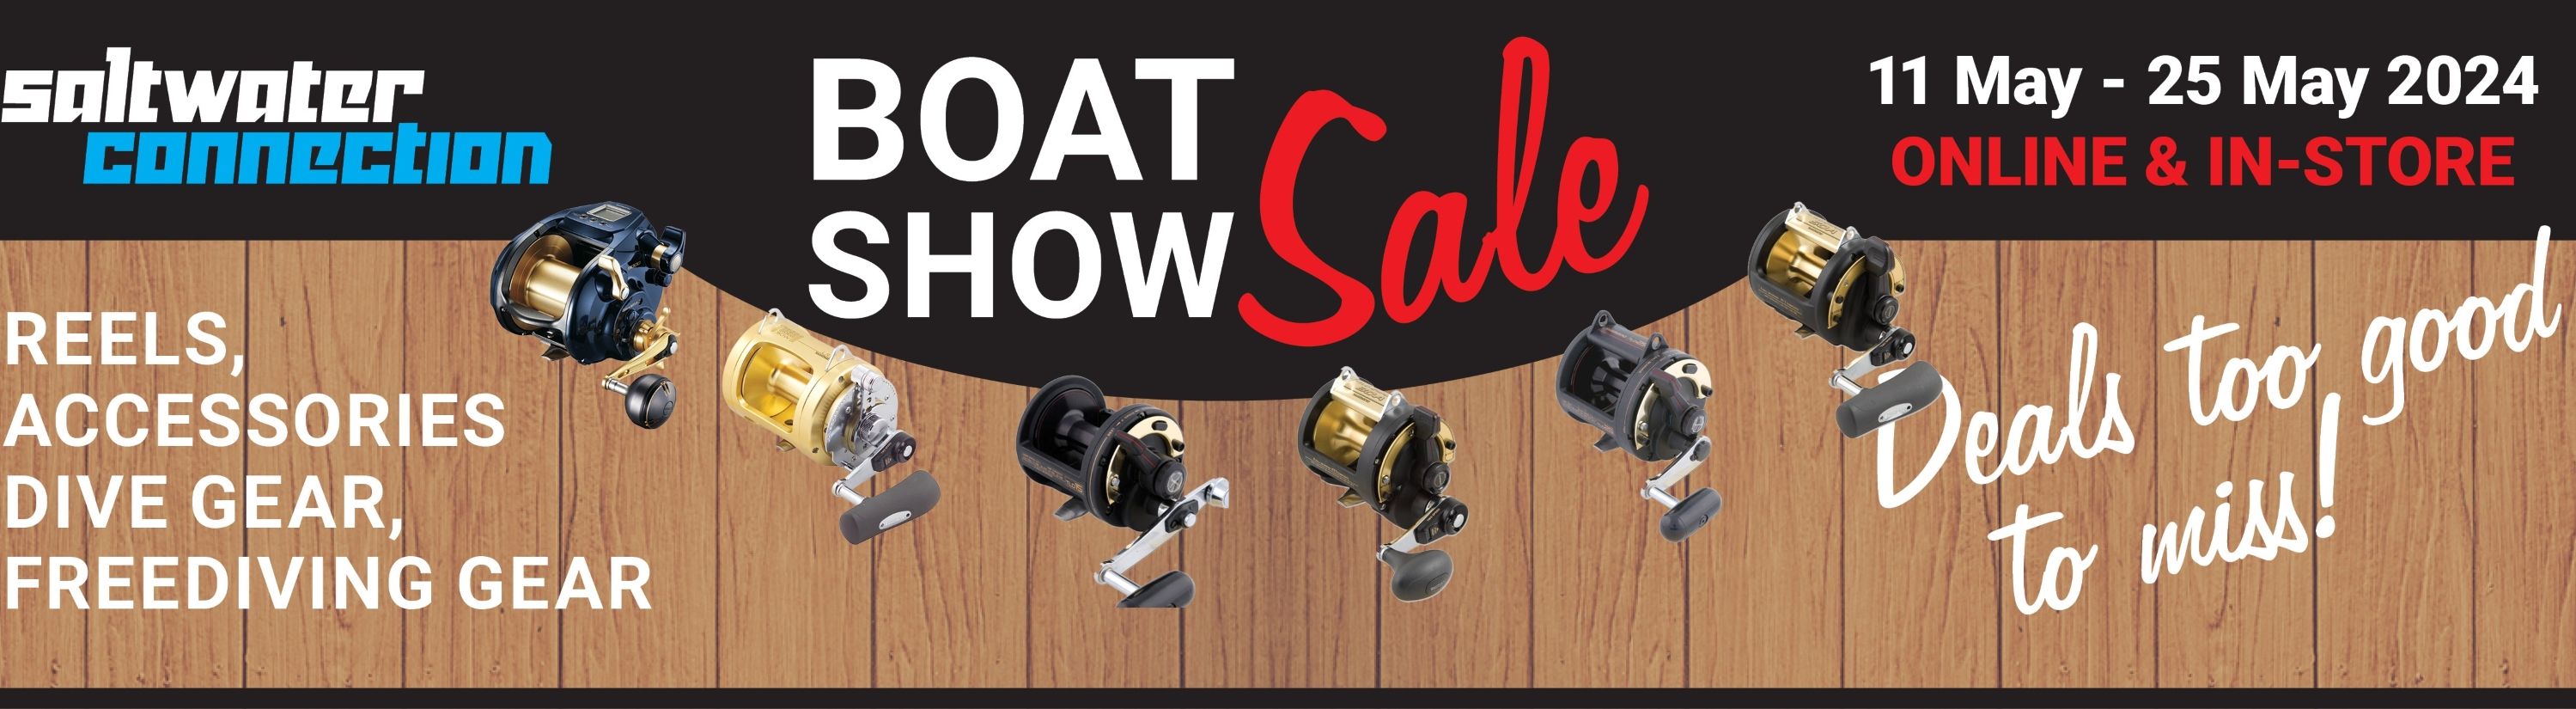 2024 Boat Show Sale